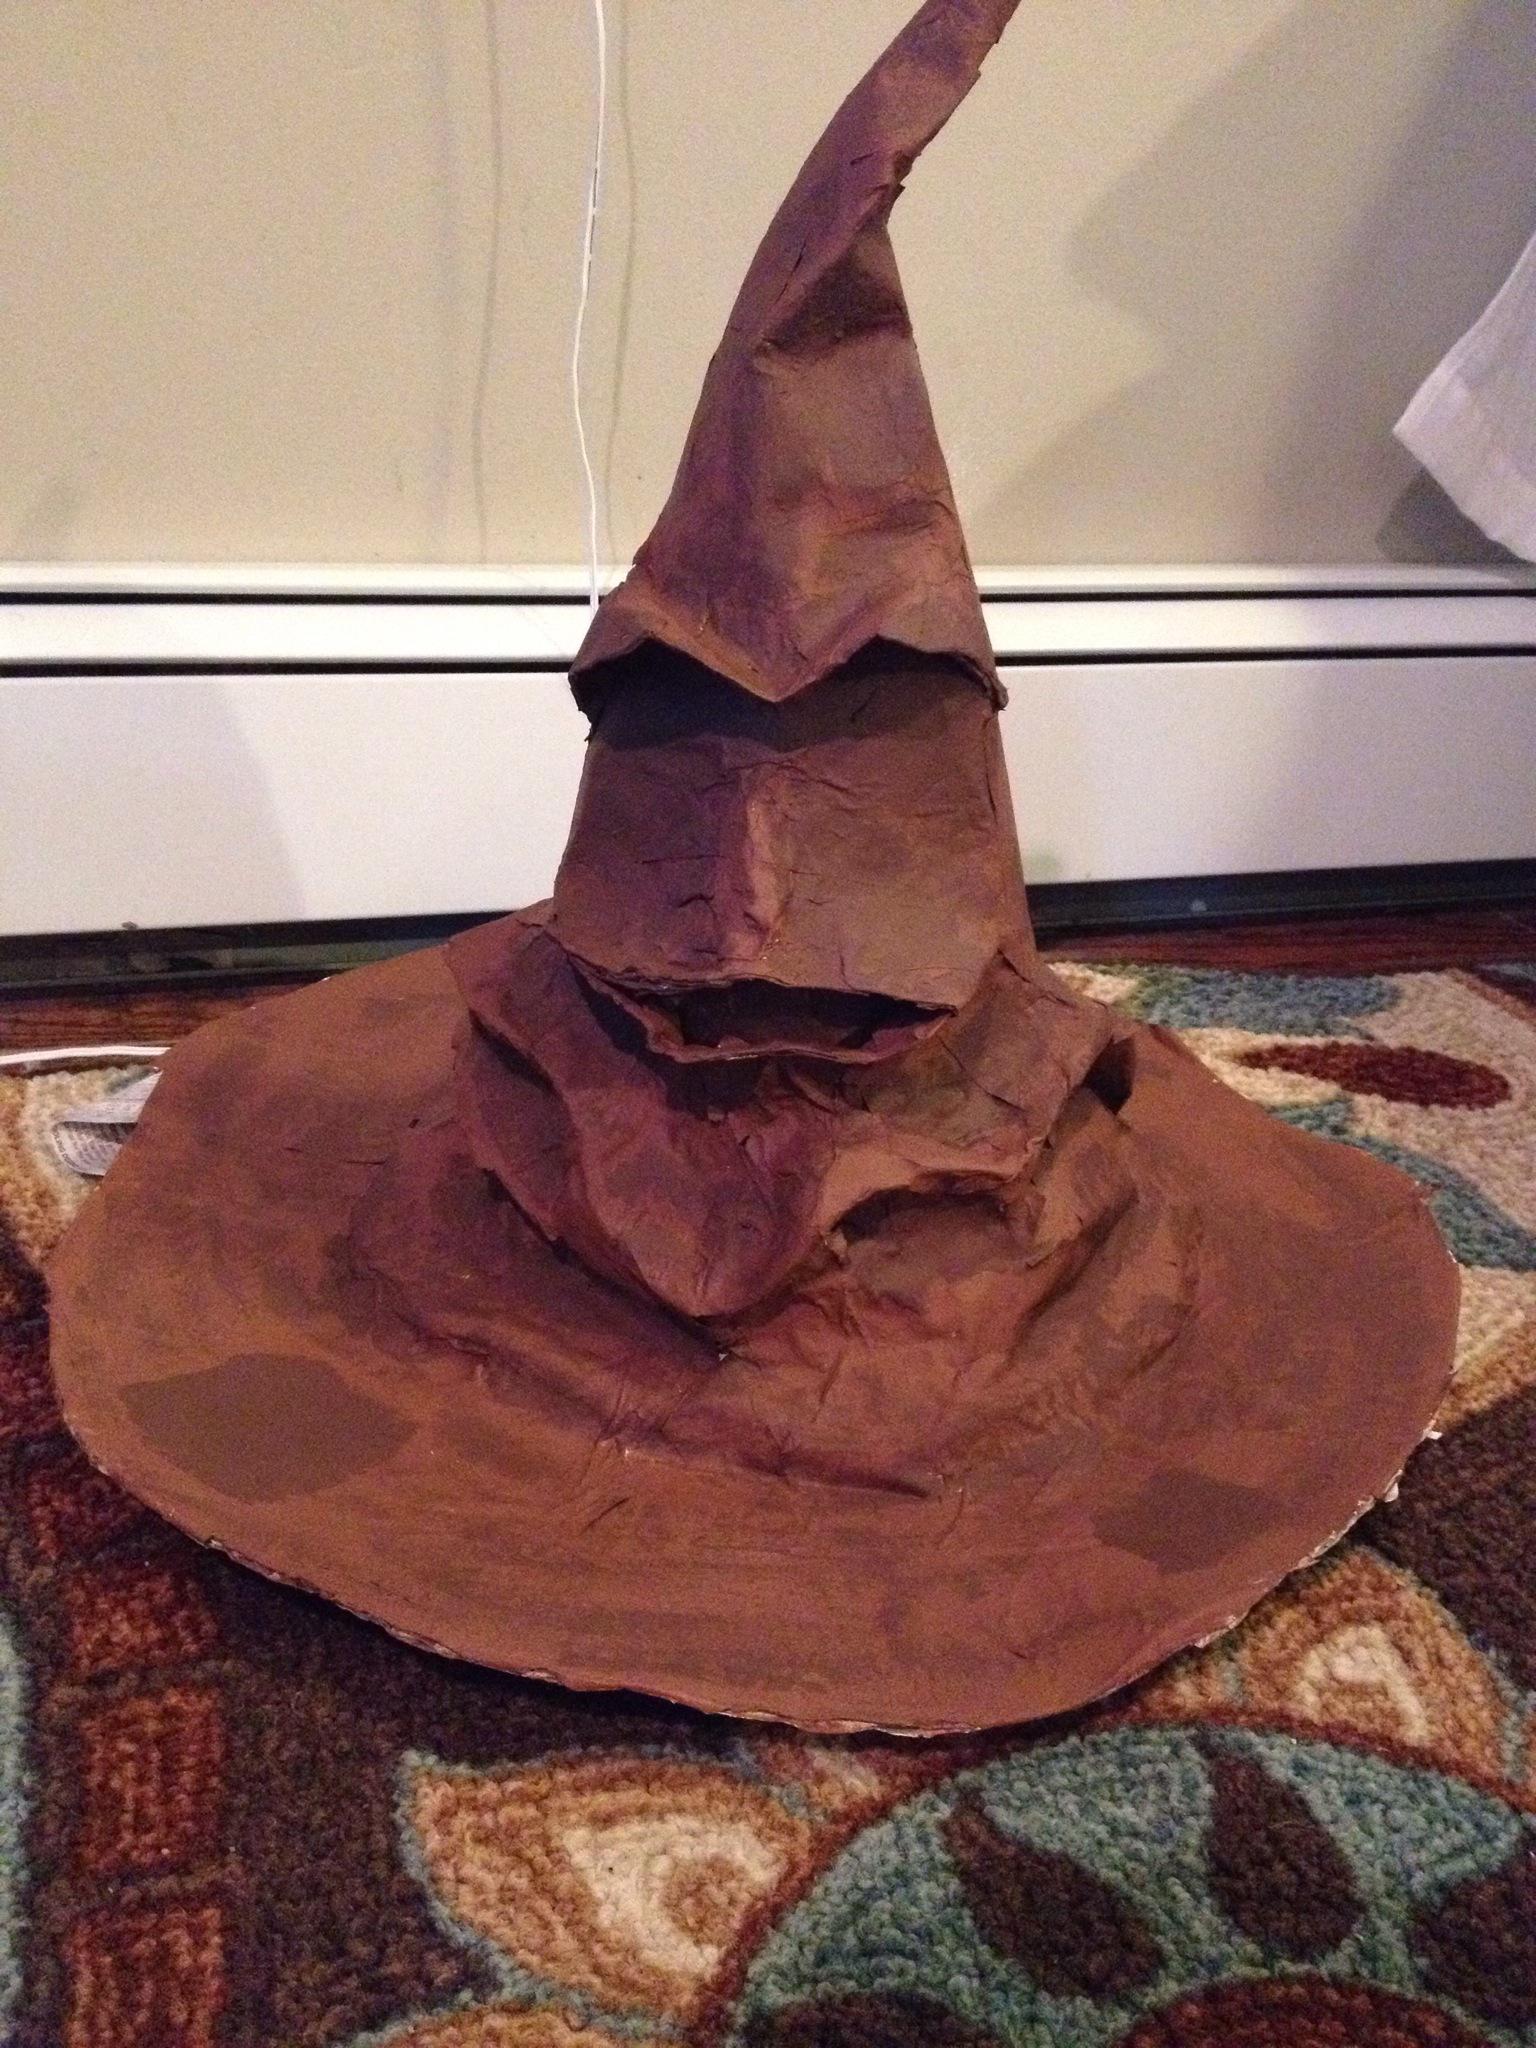 How to make a harry potter sorting hat - B+C Guides